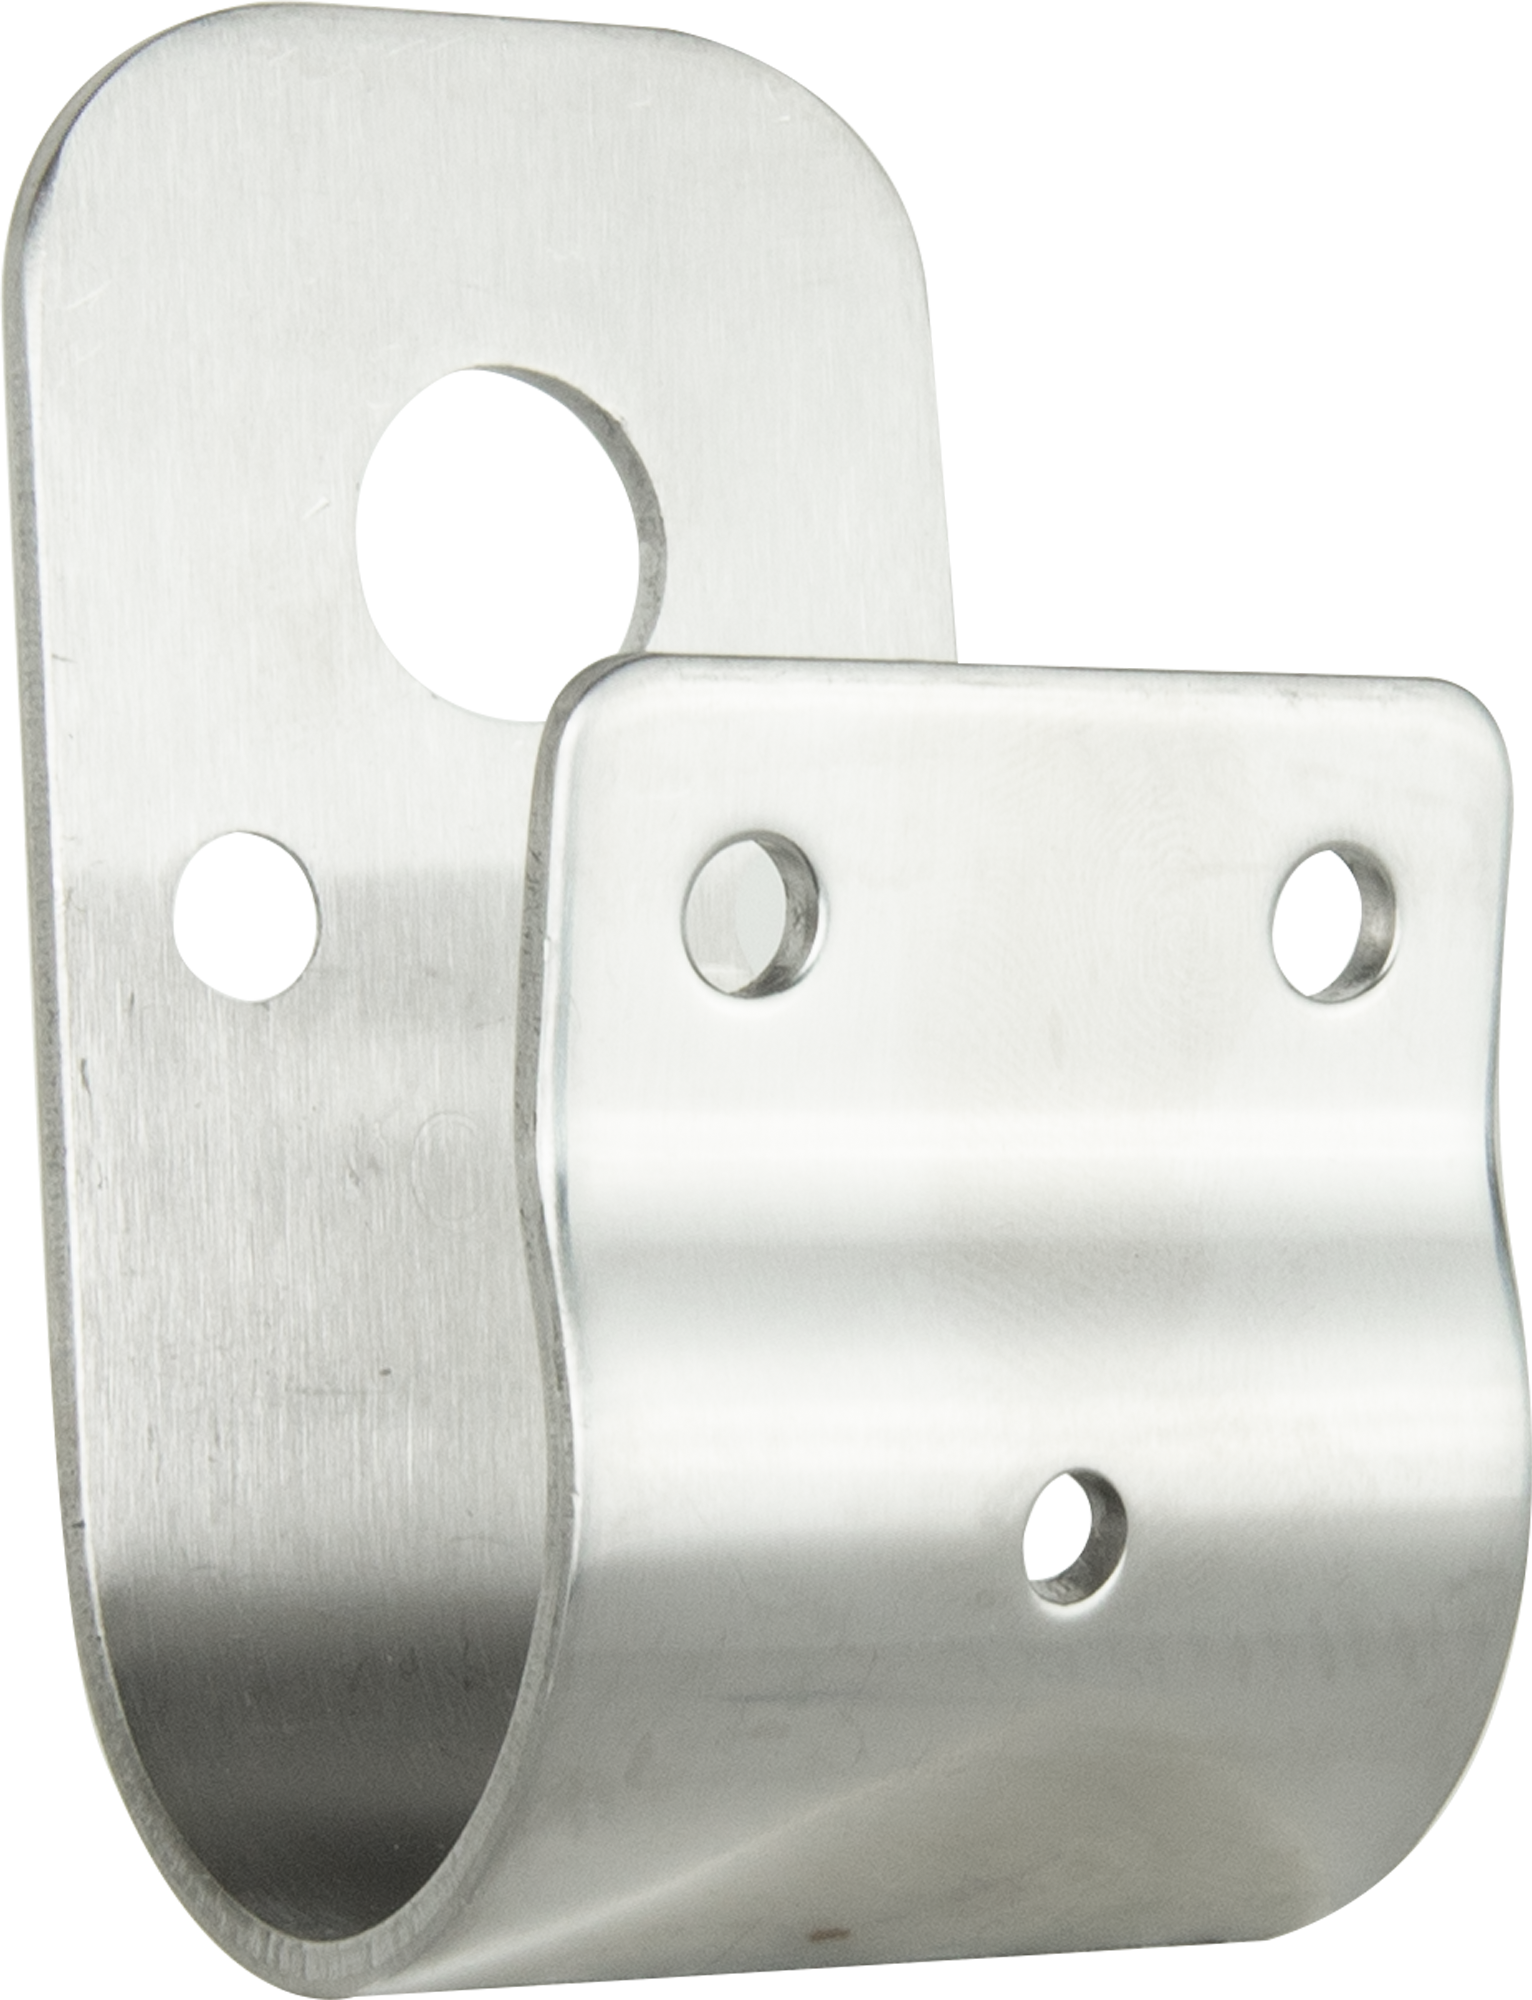 GME - 38mm Wrap Around Bull Bar Bracket- Stainless Steel - Default Title